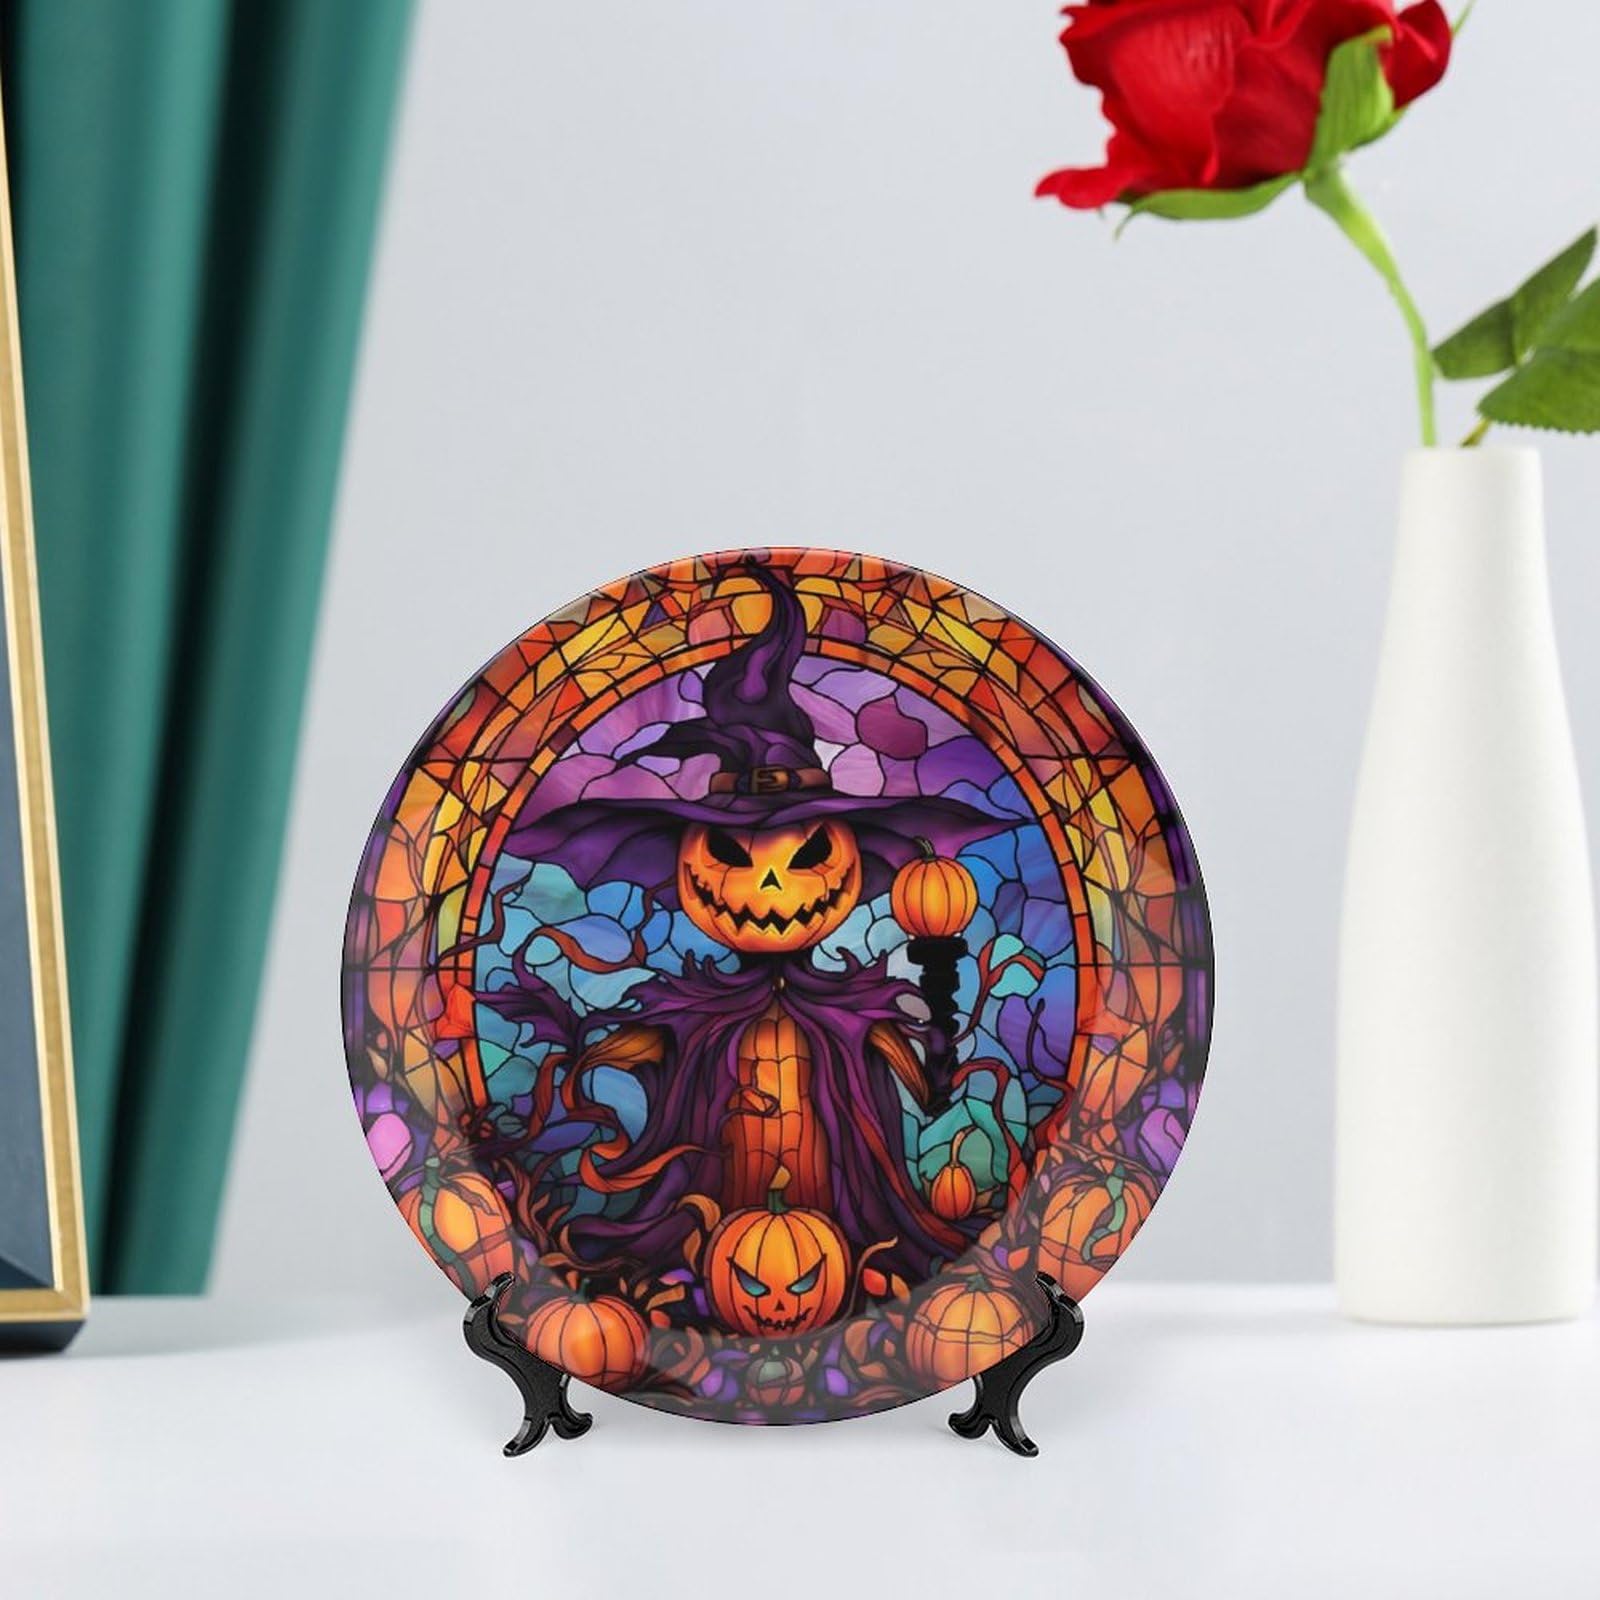 Decorative Plates for Home Decor, Halloween Scarecrow Jack-O-Lantern Stained Glass Design Decor Tray for Table Display, Ceramic Dinner Plate W/ Stand, Living Room Decor, Gifts for Halloween, 7 Inch